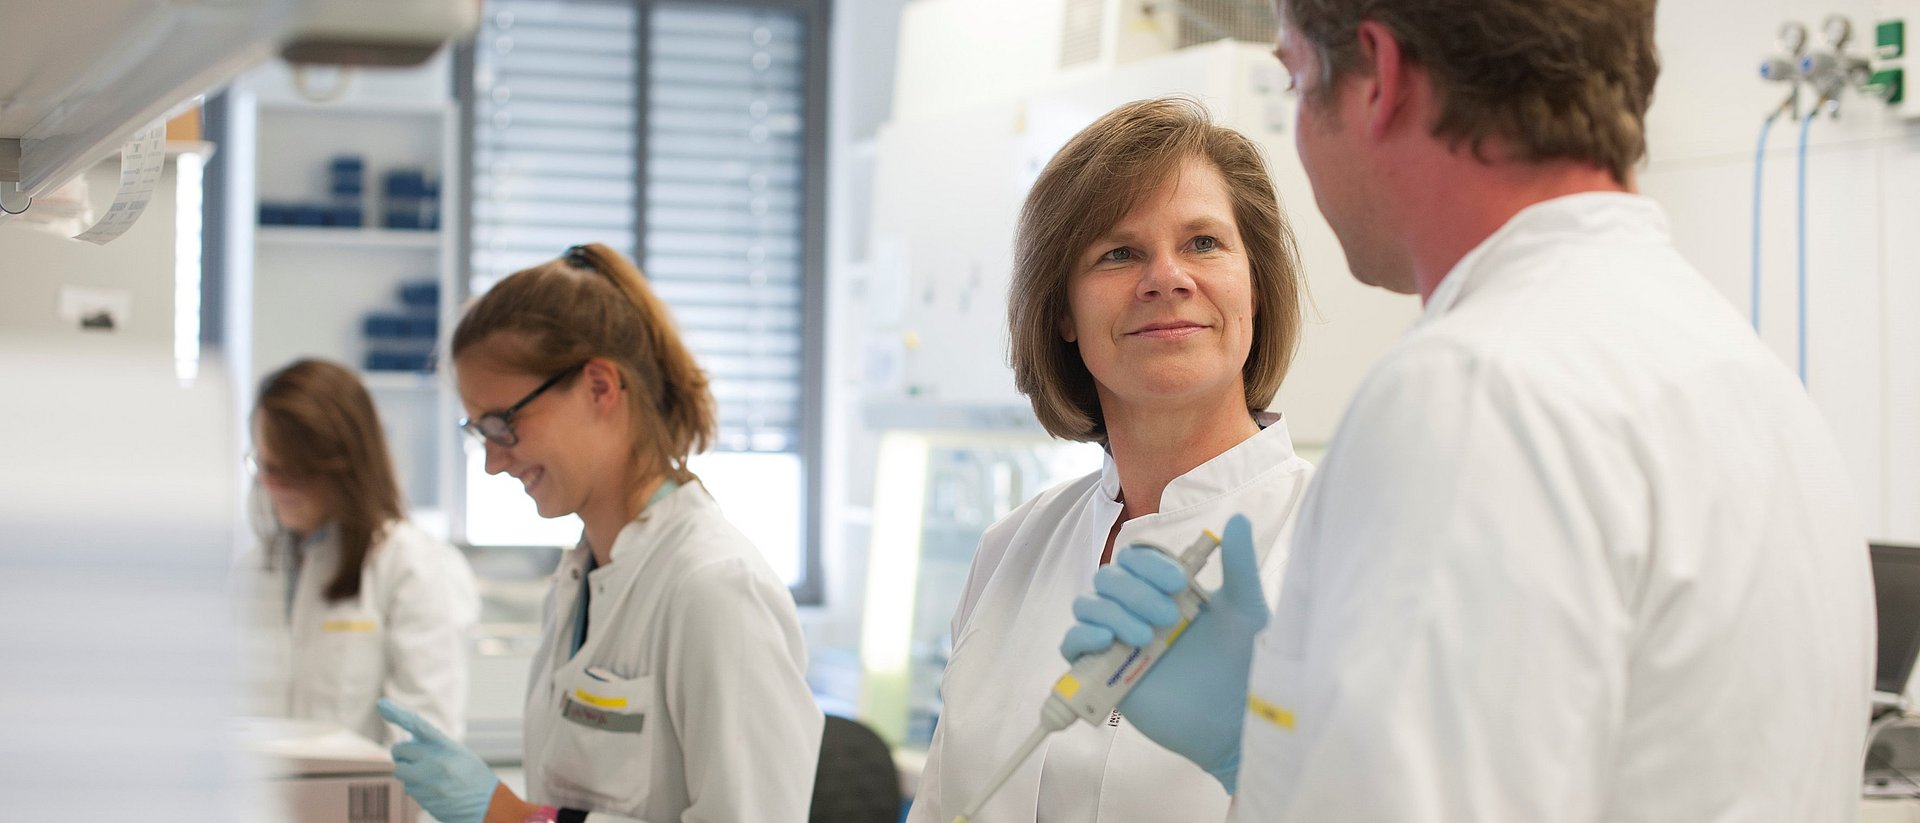 Prof. Ulrike Protzer with colleagues in the laboratory.